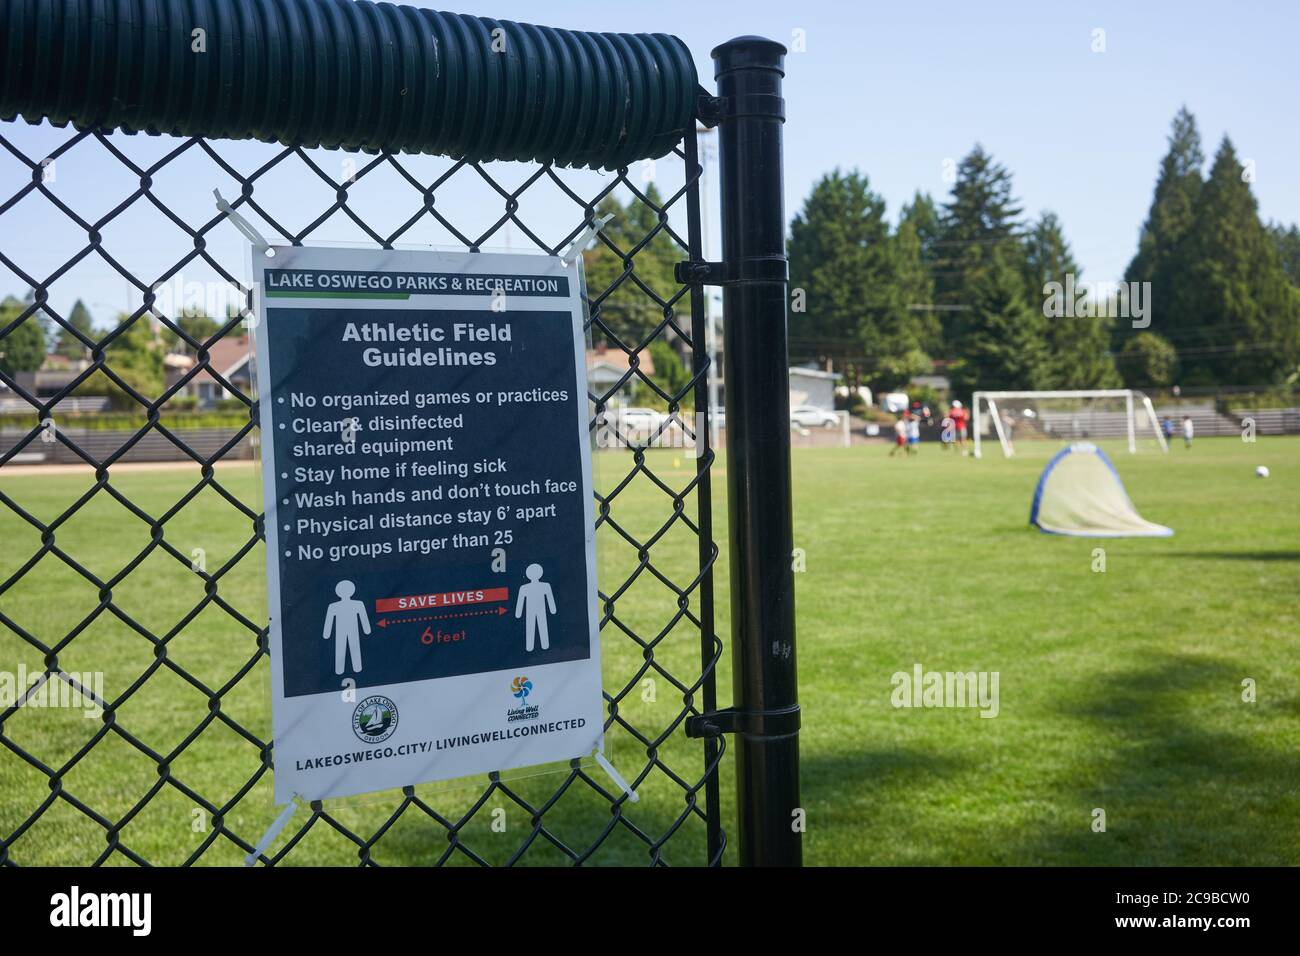 Athletic field guidelines are seen at the entrance to a sports field in Lake Oswego, Oregon, on Tuesday, July 27, 2020, during a pandemic summer. Stock Photo